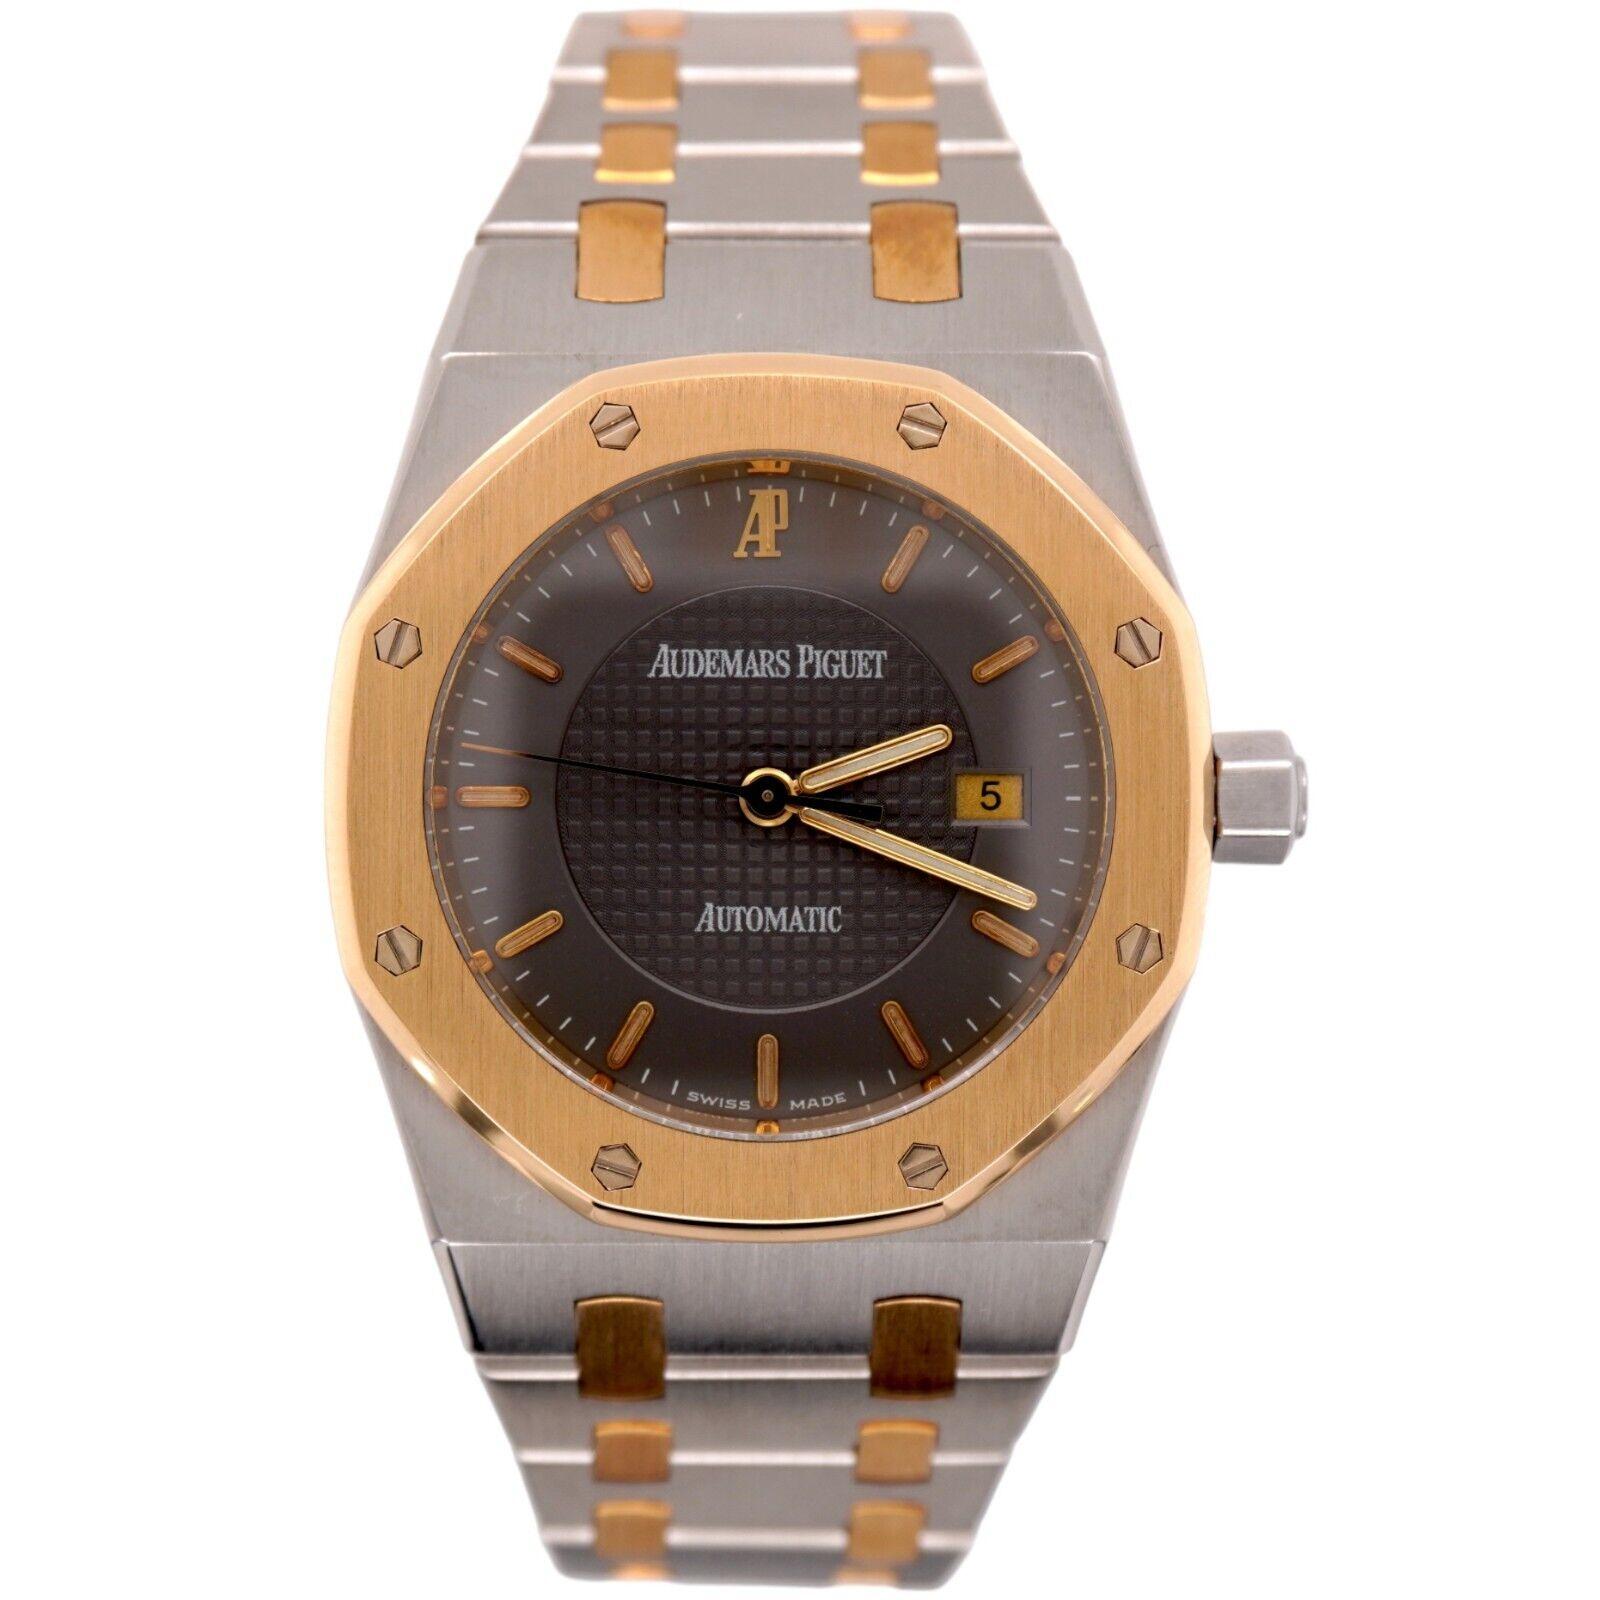 Audemars Piguet Royal Oak 33mm Watch

Pre-owned w/ Original Box & Paper
100% Authentic
Condition - (Excellent Condition) - See Pics
Watch Reference - 15050SA
Model - Royal Oak
Dial Color - Gray
Material - 18k Yellow Gold/Stainless Steel
Watch Will